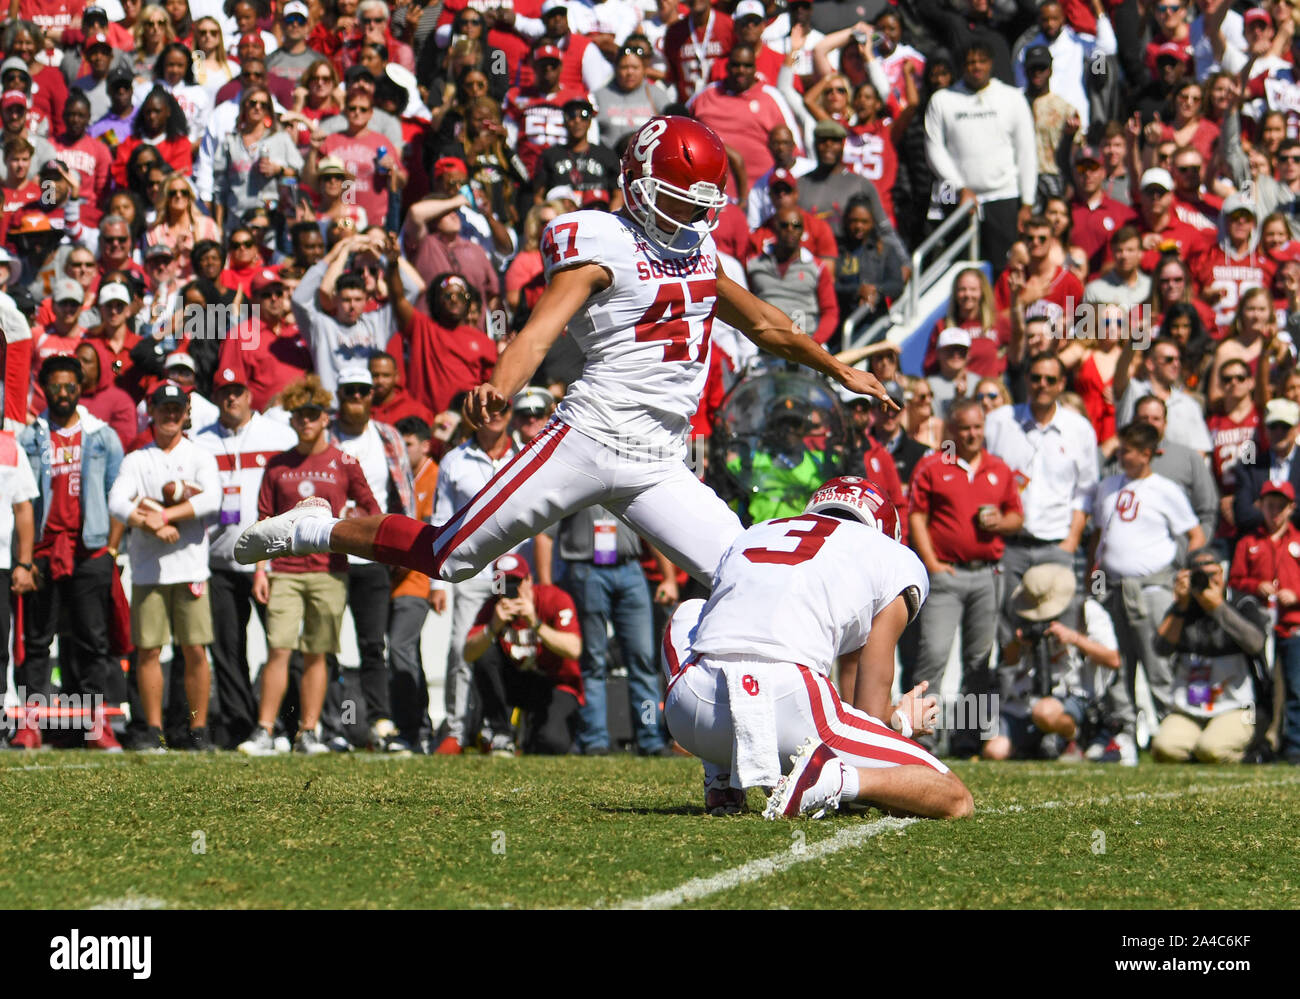 Oct 12, 2019: Oklahoma Sooners place kicker Gabe Brkic #47 kicks an extra point during the NCAA Red River Rivalry game between the University of Oklahoma Sooners and the University of Texas Longhorns at the Cotton Bowl Stadium at Fair Park in Dallas, TX Oklahoma defeated 34-27 Albert Pena/CSM Stock Photo